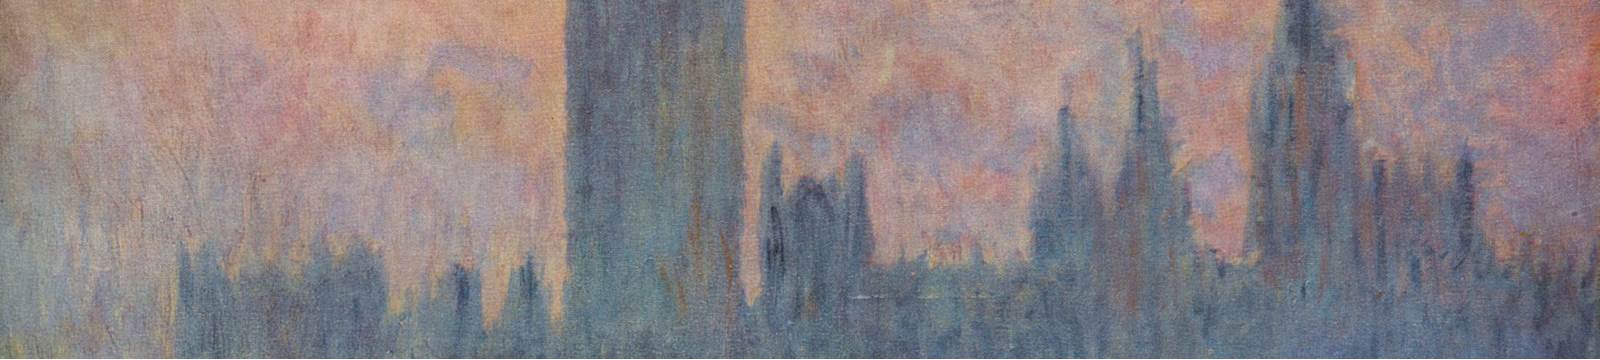 Monet's Painting of Parliament